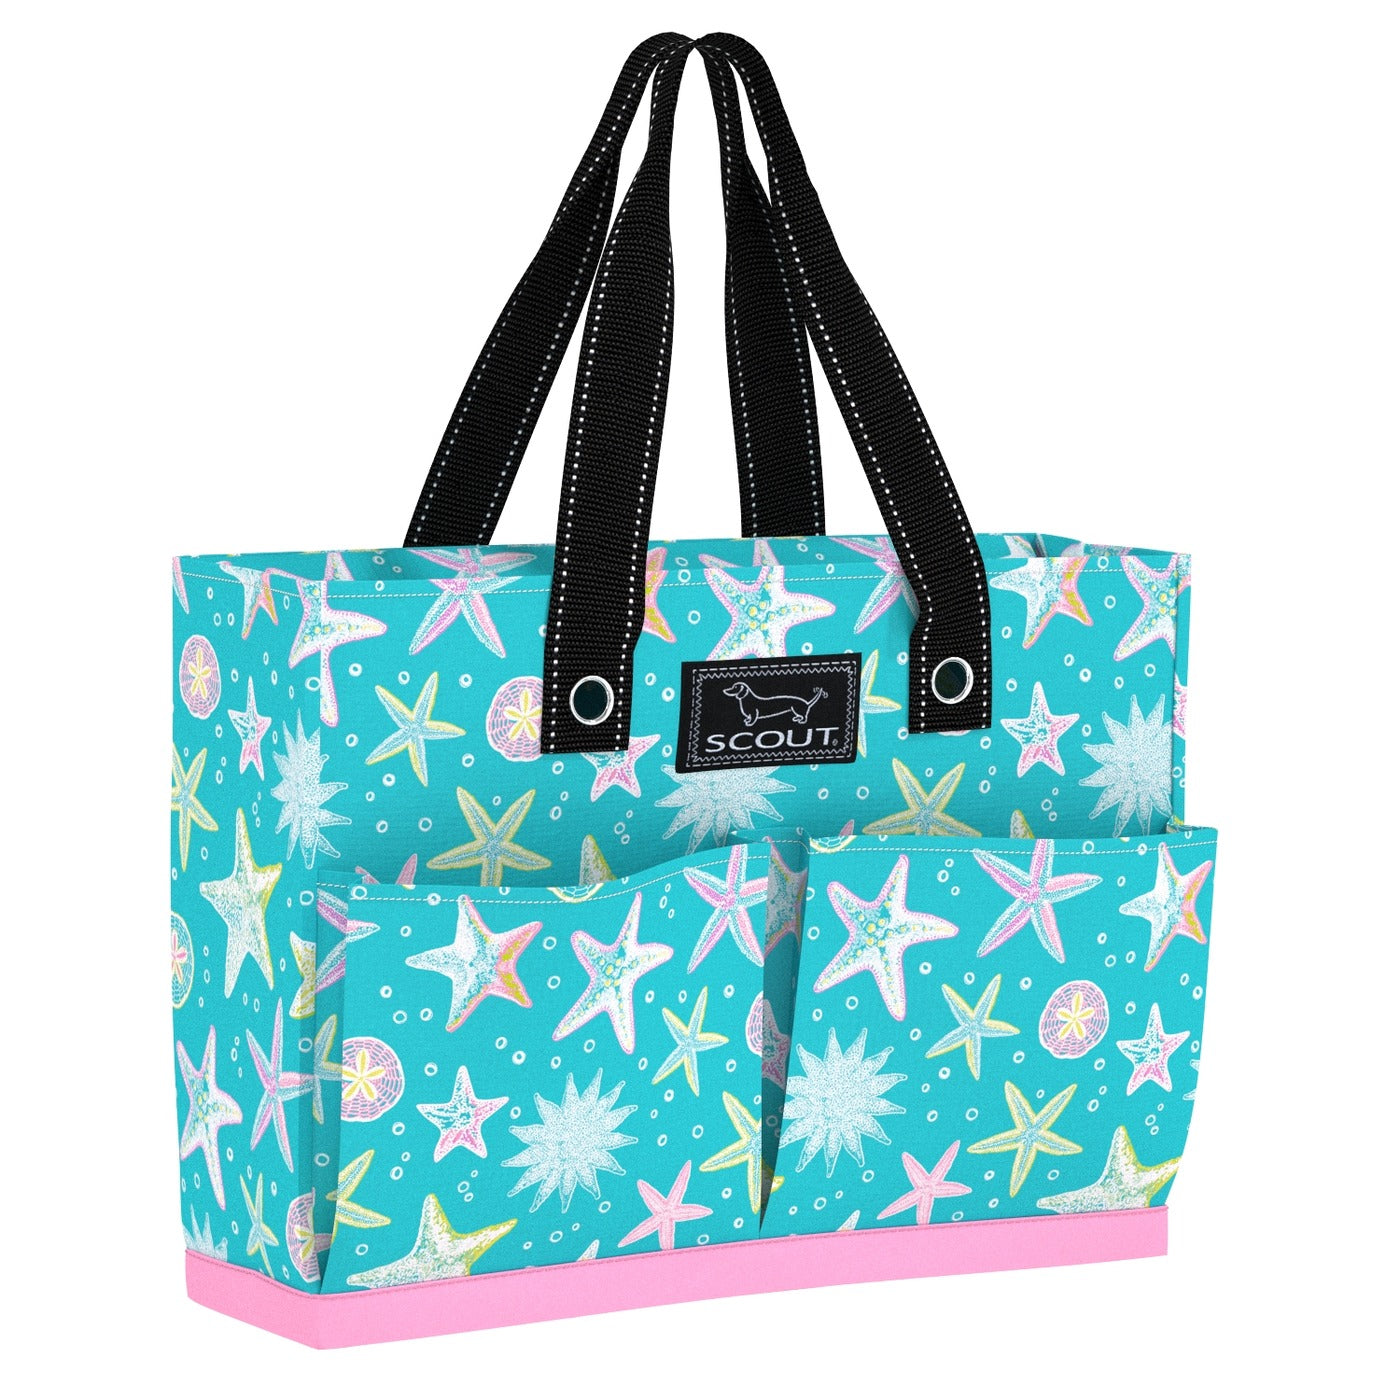 Uptown Girl - Tote